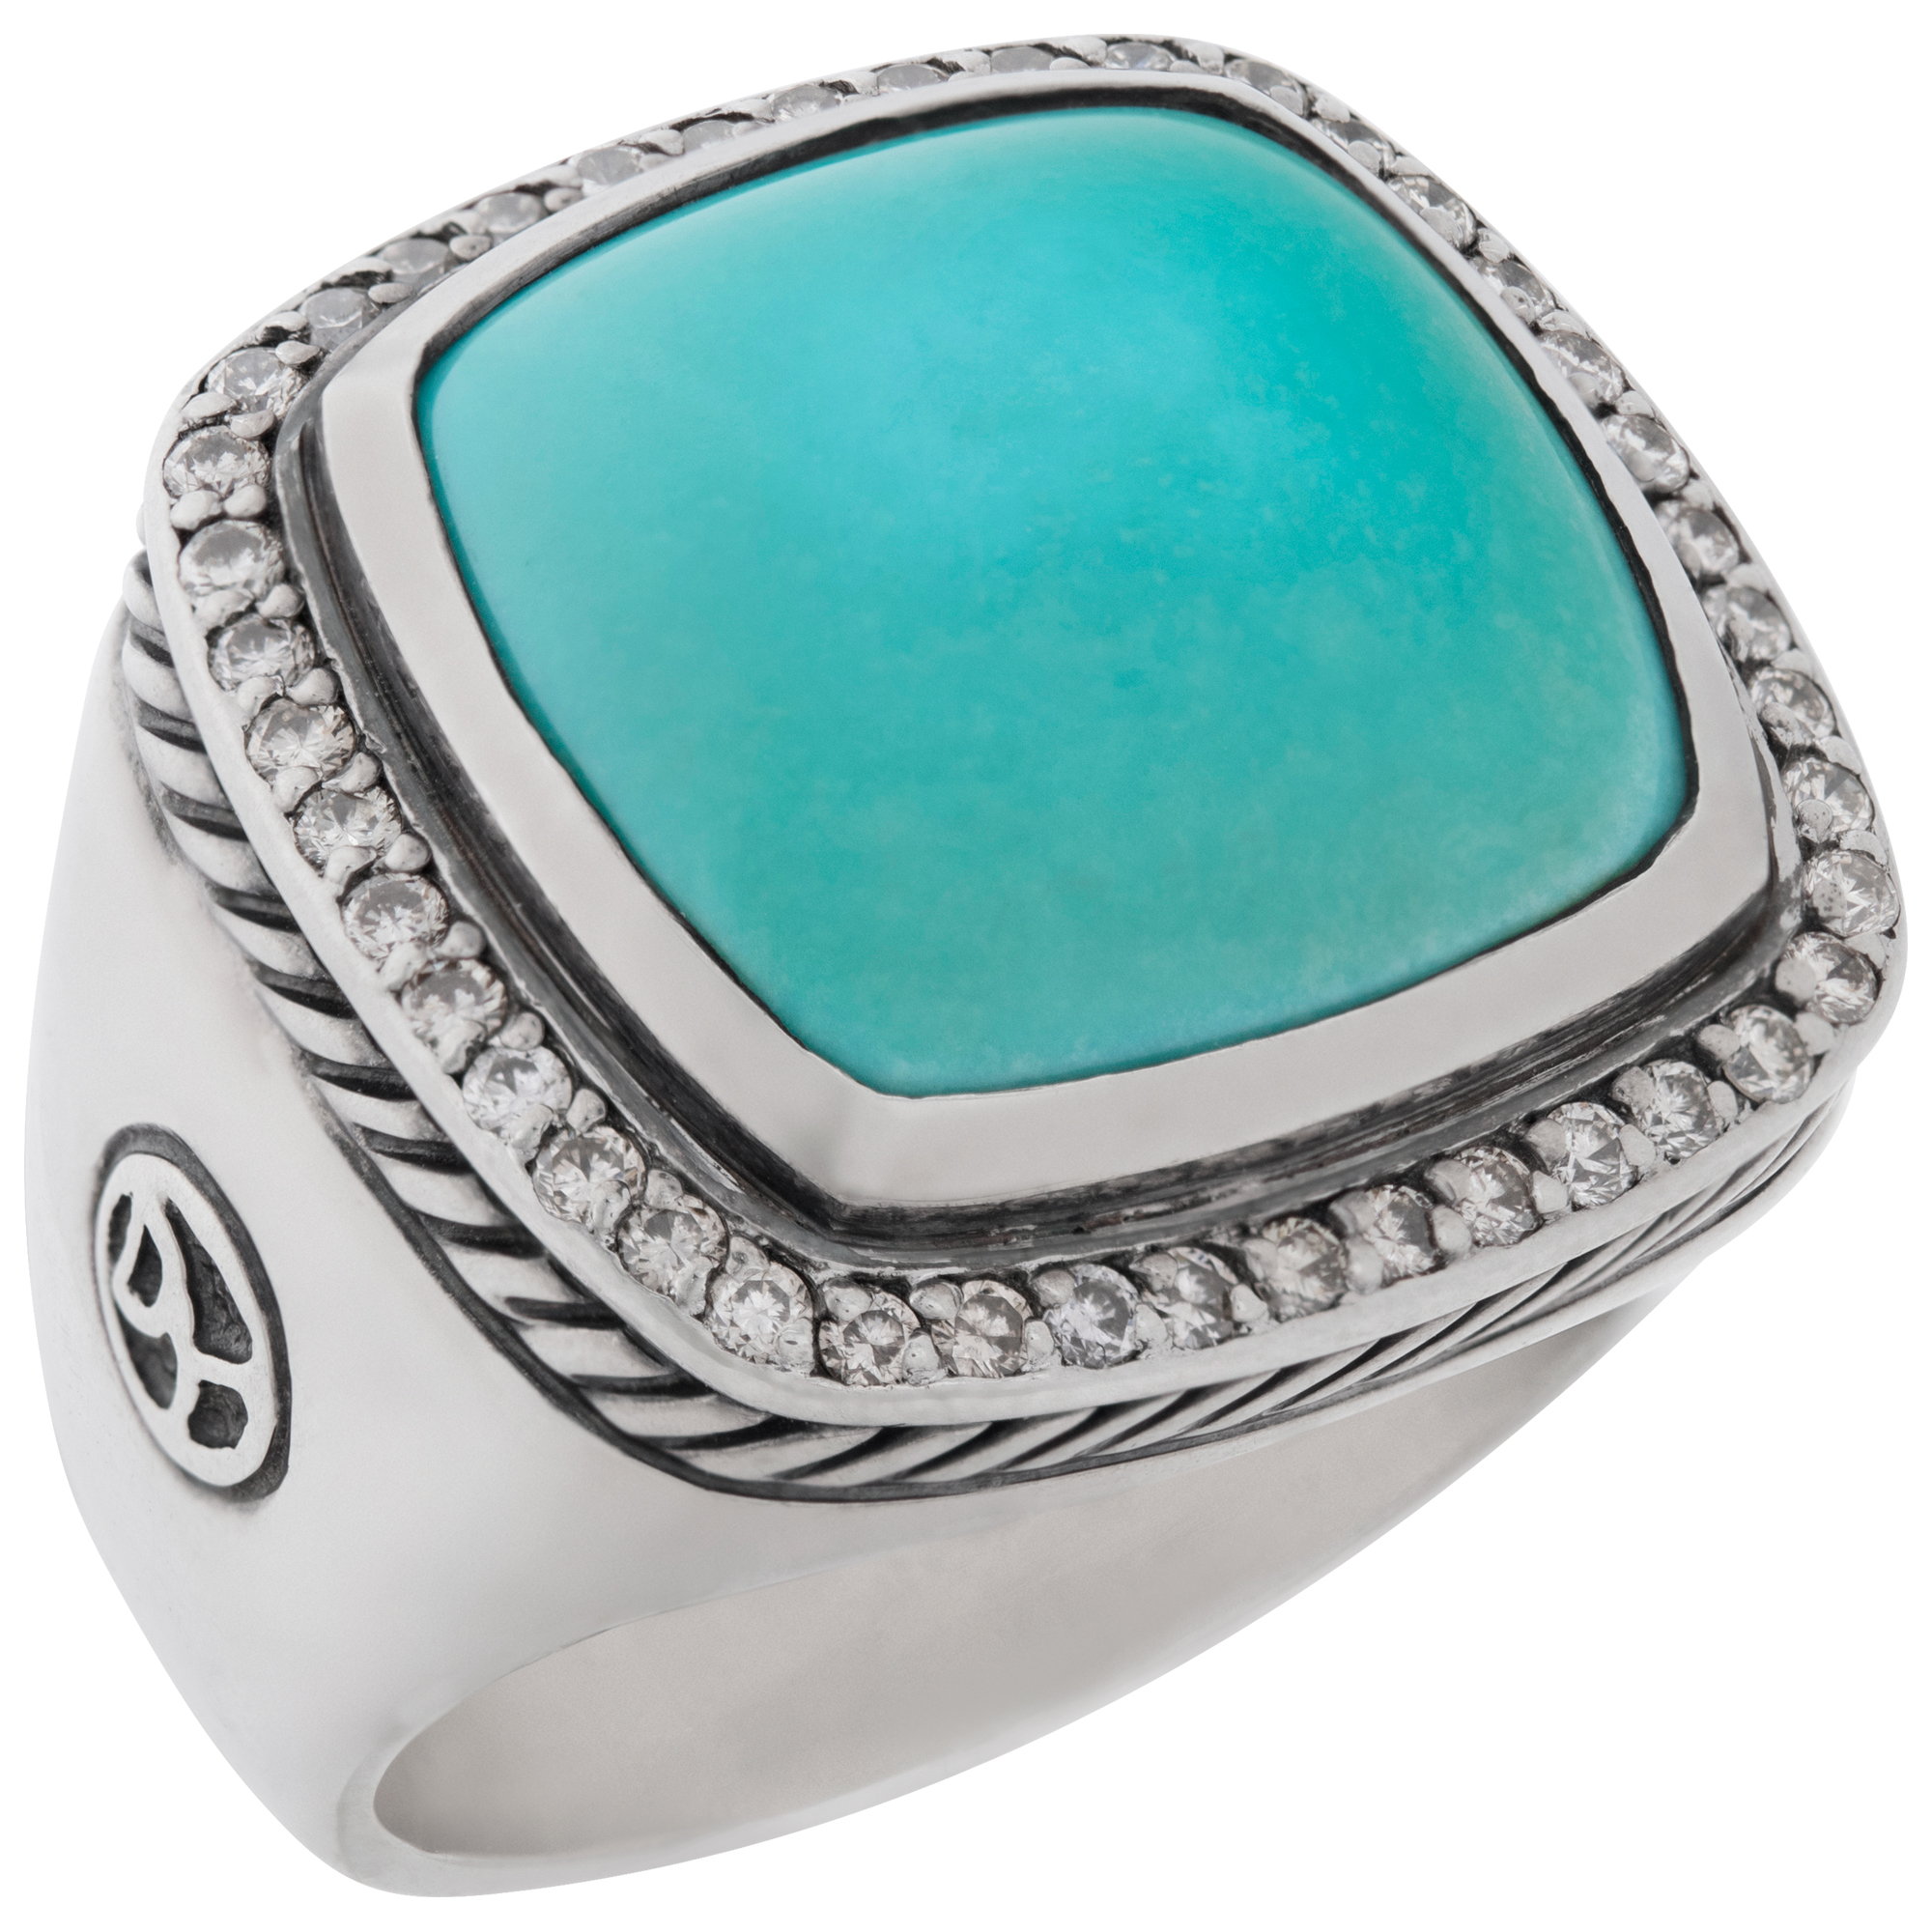 David Yurman Turquoise Albion ring in sterling silver ring with diamond accents image 3